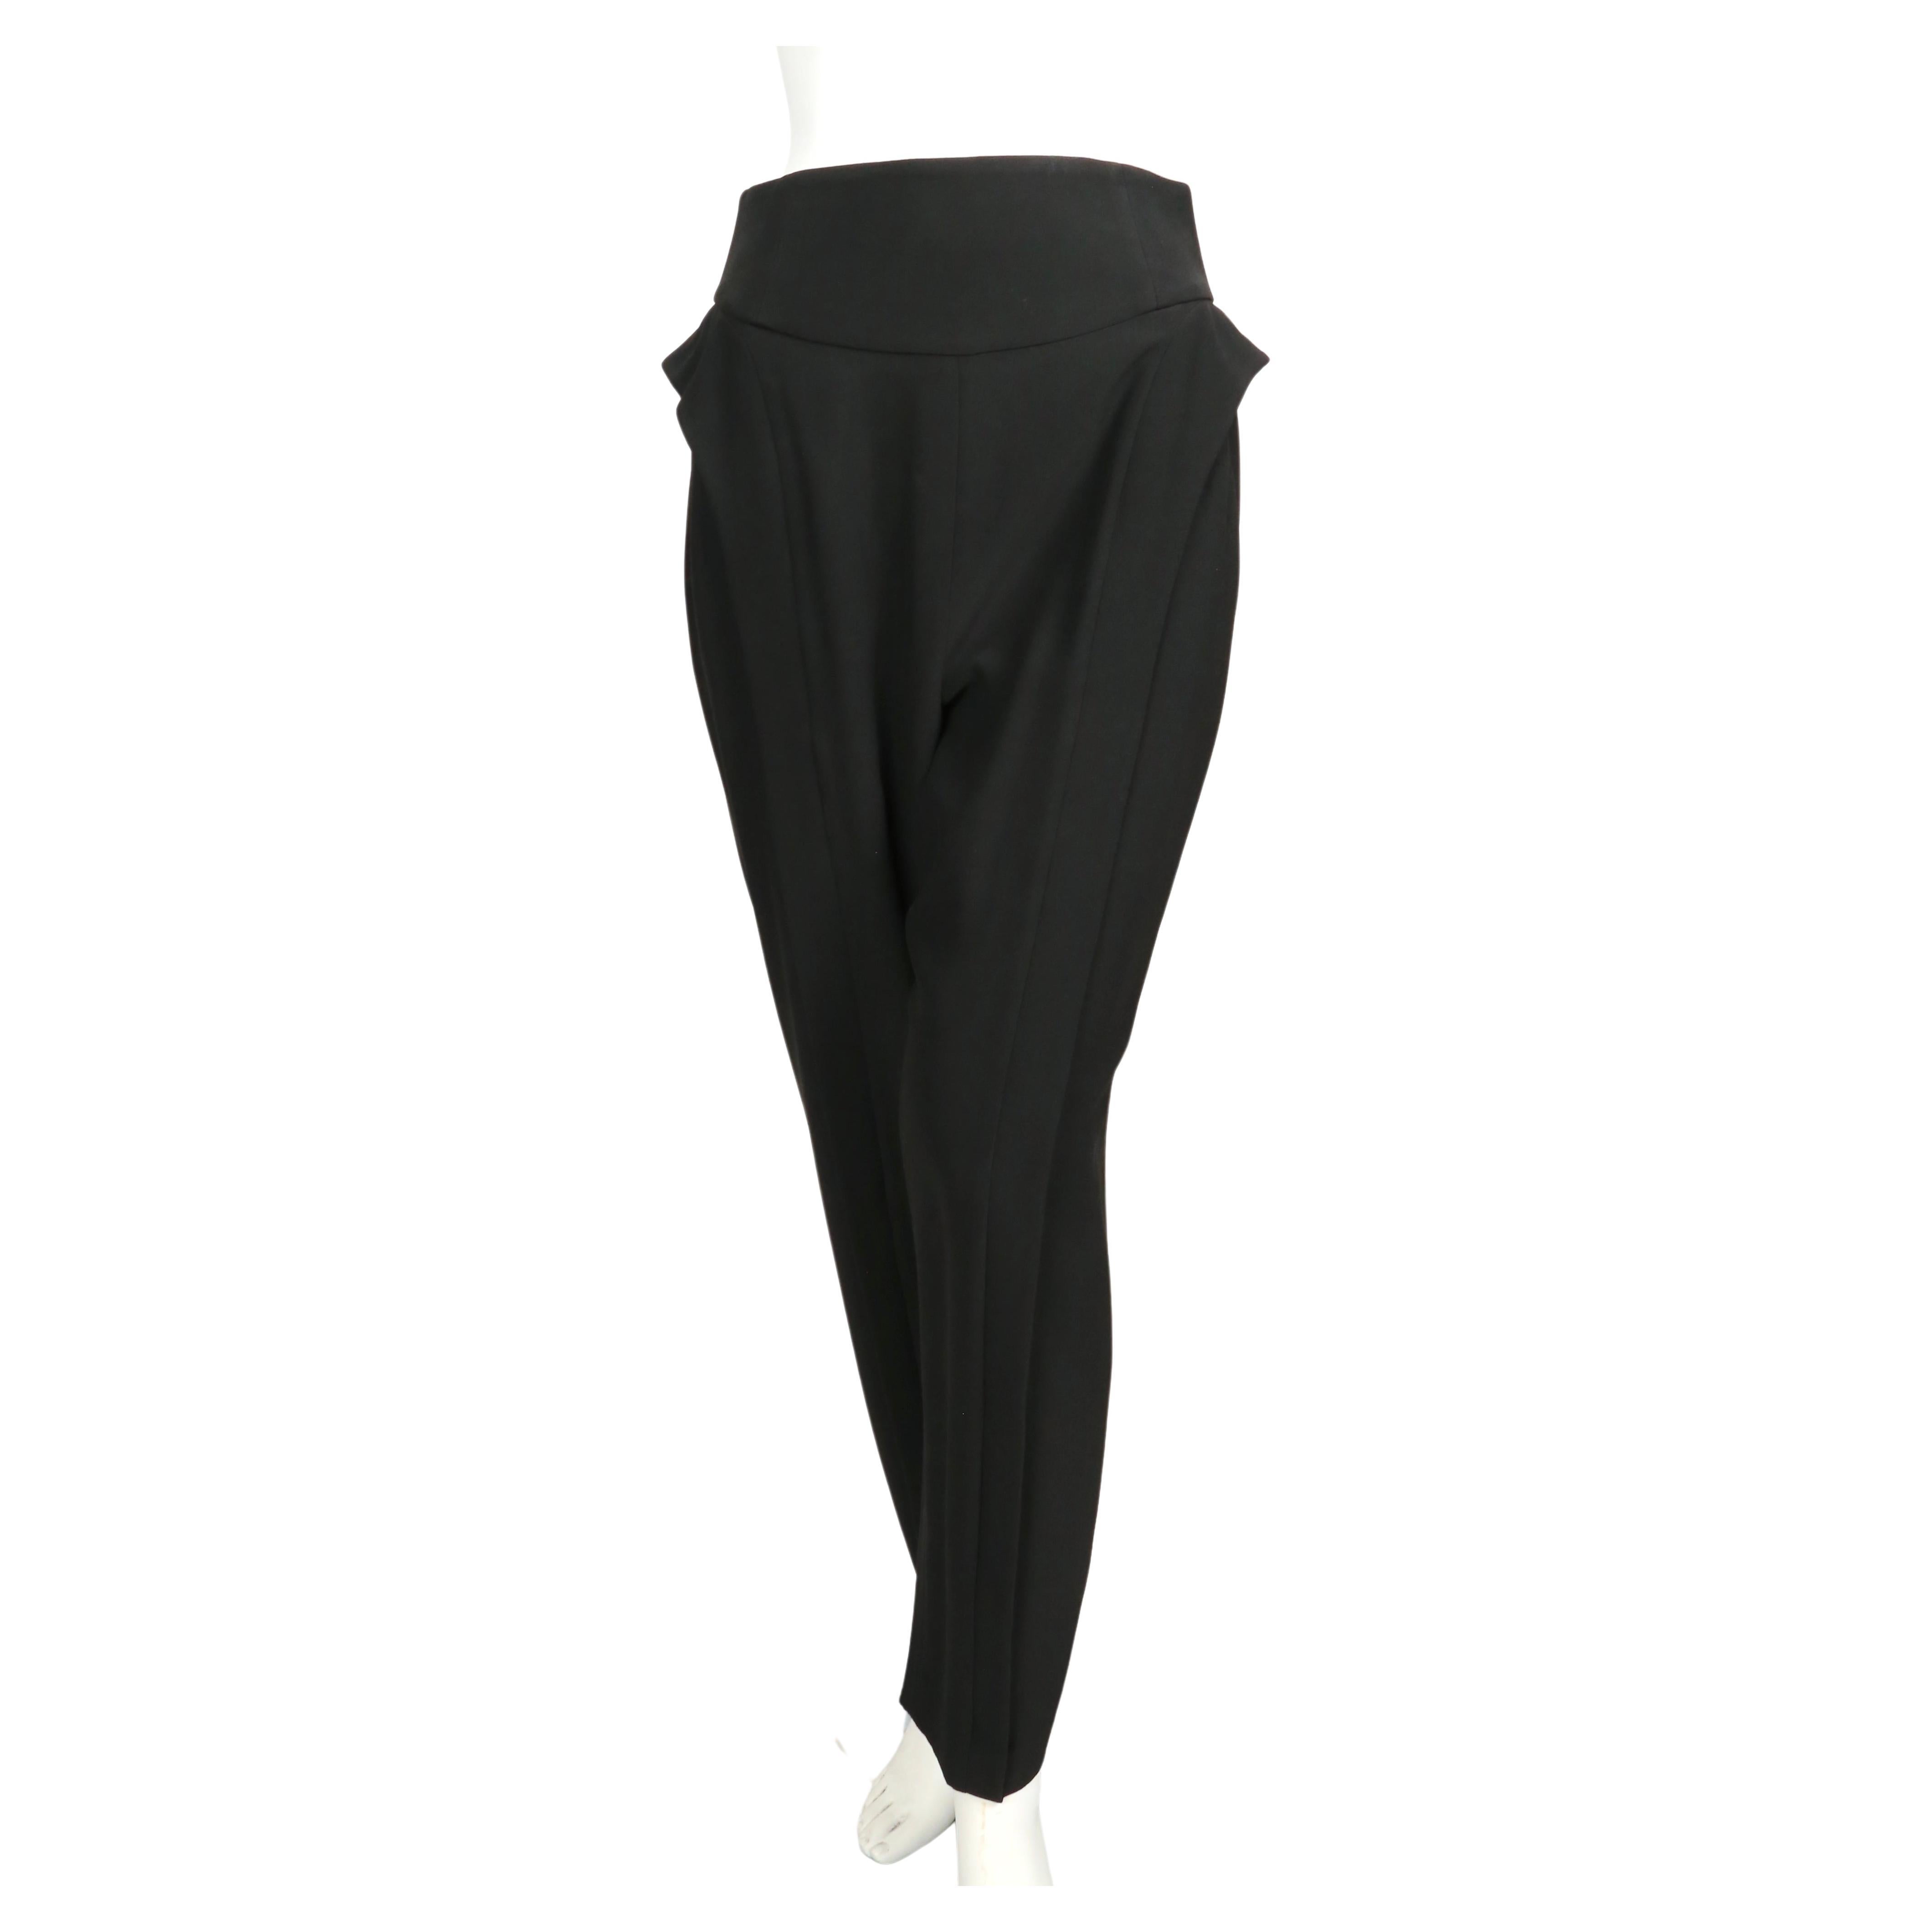 Black high waist pants with side ruffles designed by Alexander McQueen dating to the 2000's. Labeled an Italian size 42. Pants were not clipped on French size 36 mannequin. Approximate measurements: waist 27